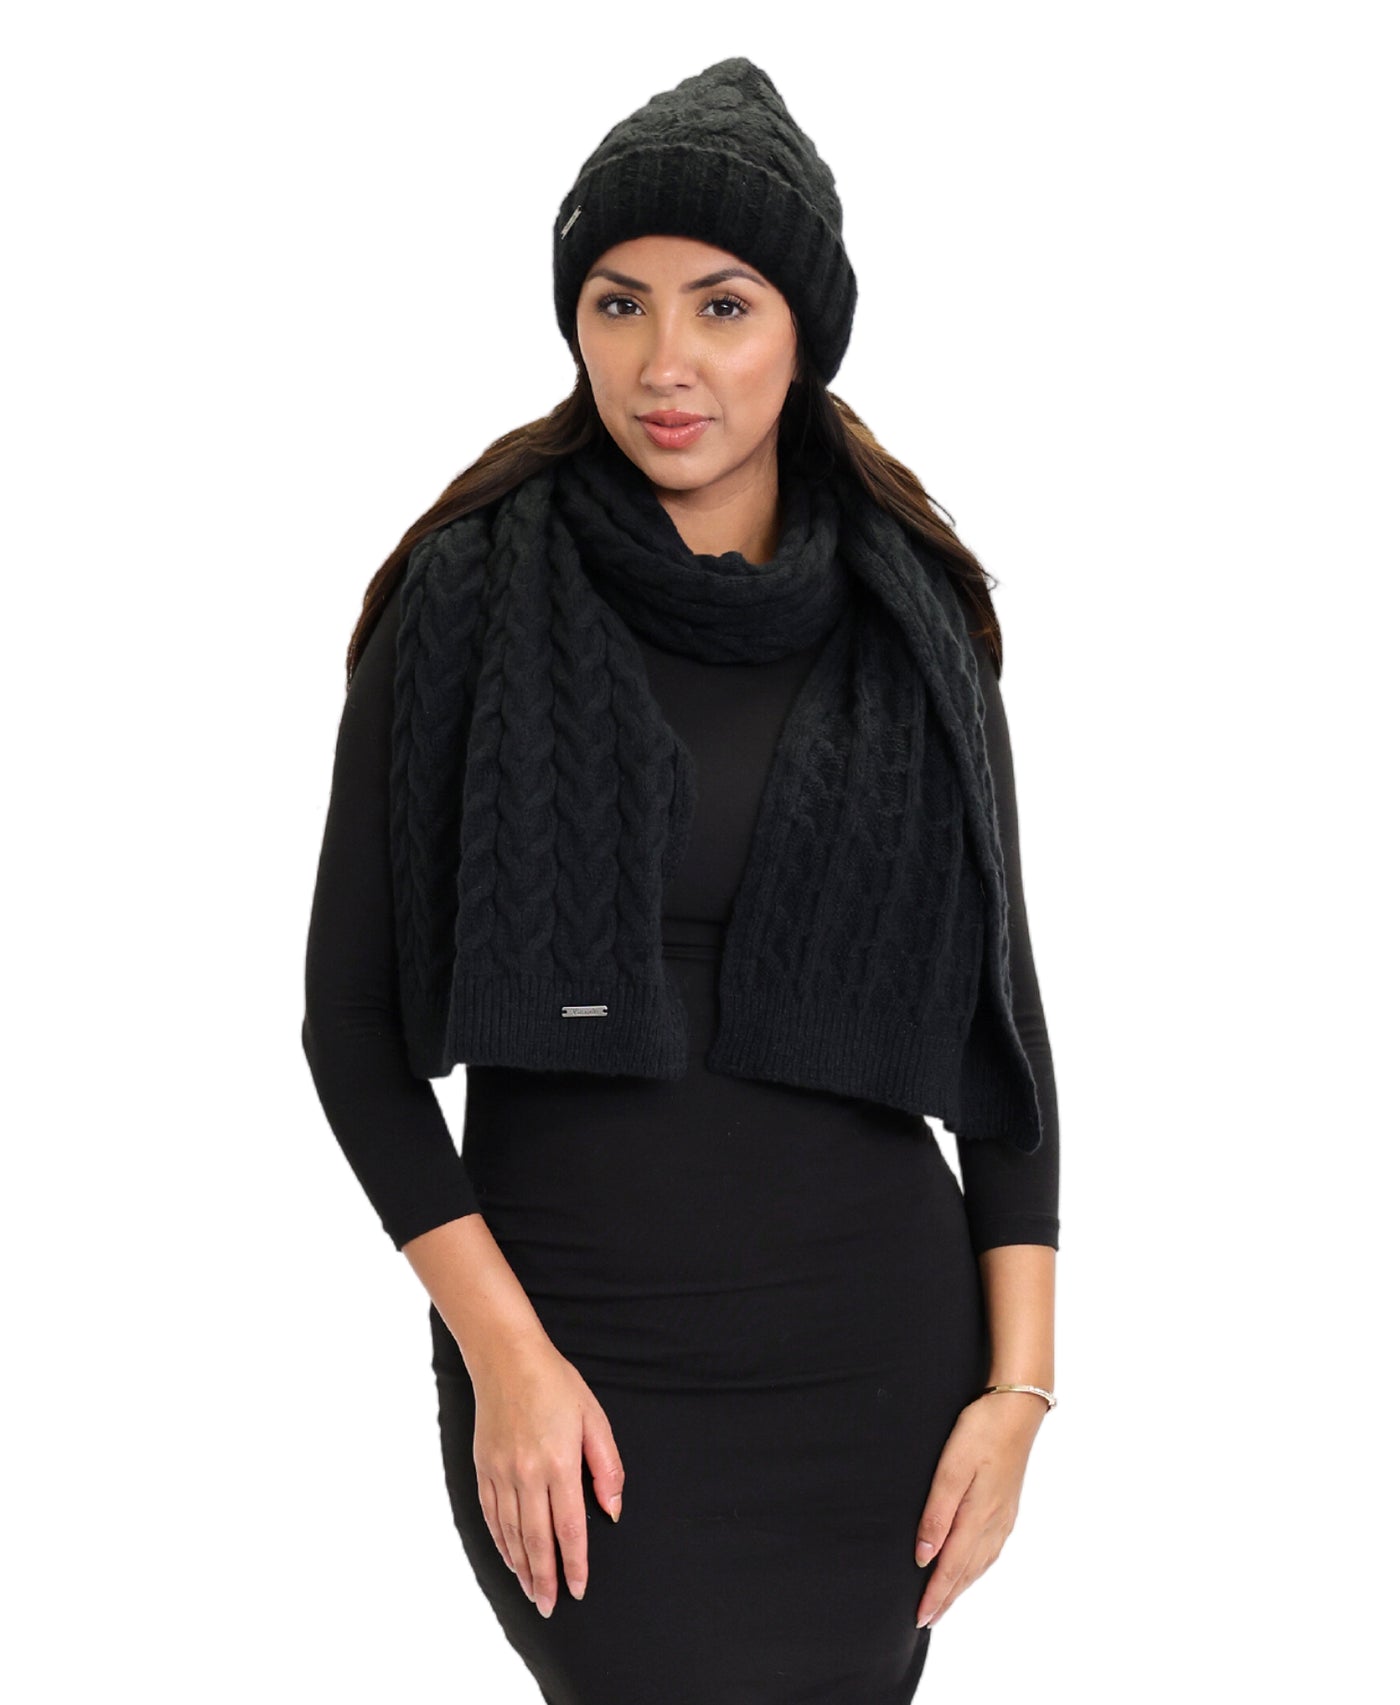 Cable Knit Hat & Scarf Set image 1